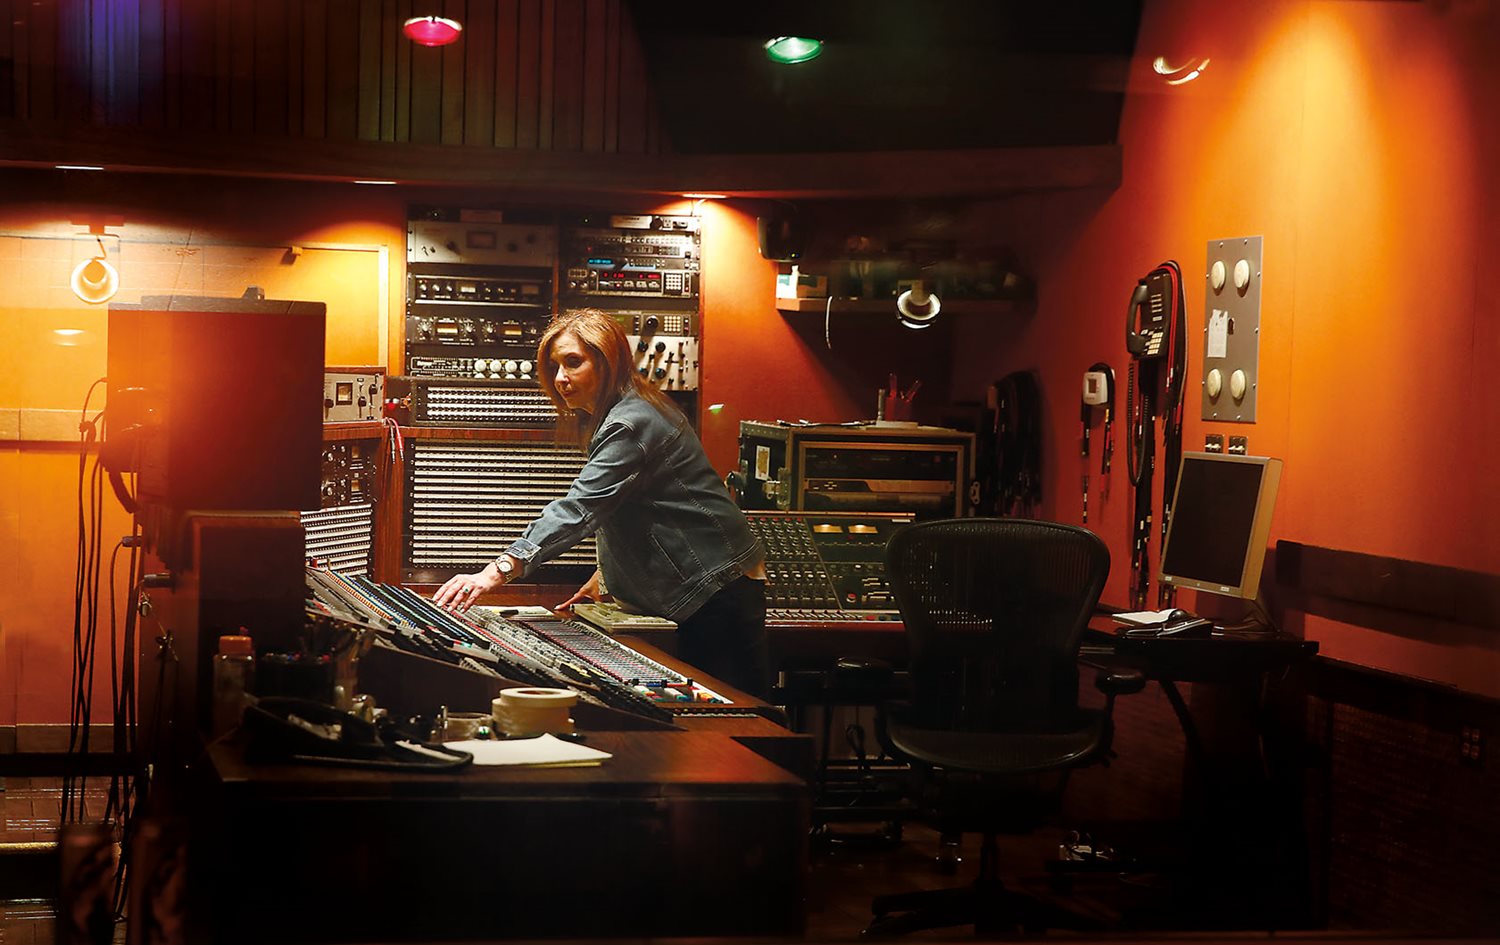 At Sunset Sound, Elder prepares for recording sessions planned with Cheb Khaled later in the week. Since the 1960s the studio has recorded not only dozens of music and film-score icons but hundreds of hopefuls&mdash;including, in 2016, Ty Waters (Tyson Venegas), then 10 years old, whom Elder mentored as a writer and singer through her Ultimate Vocal Music Summit.